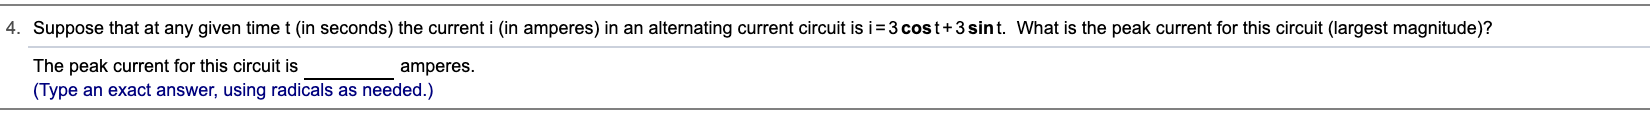 4. Suppose that at any given time t (in seconds) the current i (in amperes) in an alternating current circuit is i=3 cost+3 sint. What is the peak current for this circuit (largest magnitude)?
The peak current for this circuit is
(Type an exact answer, using radicals as needed.)
amperes.
